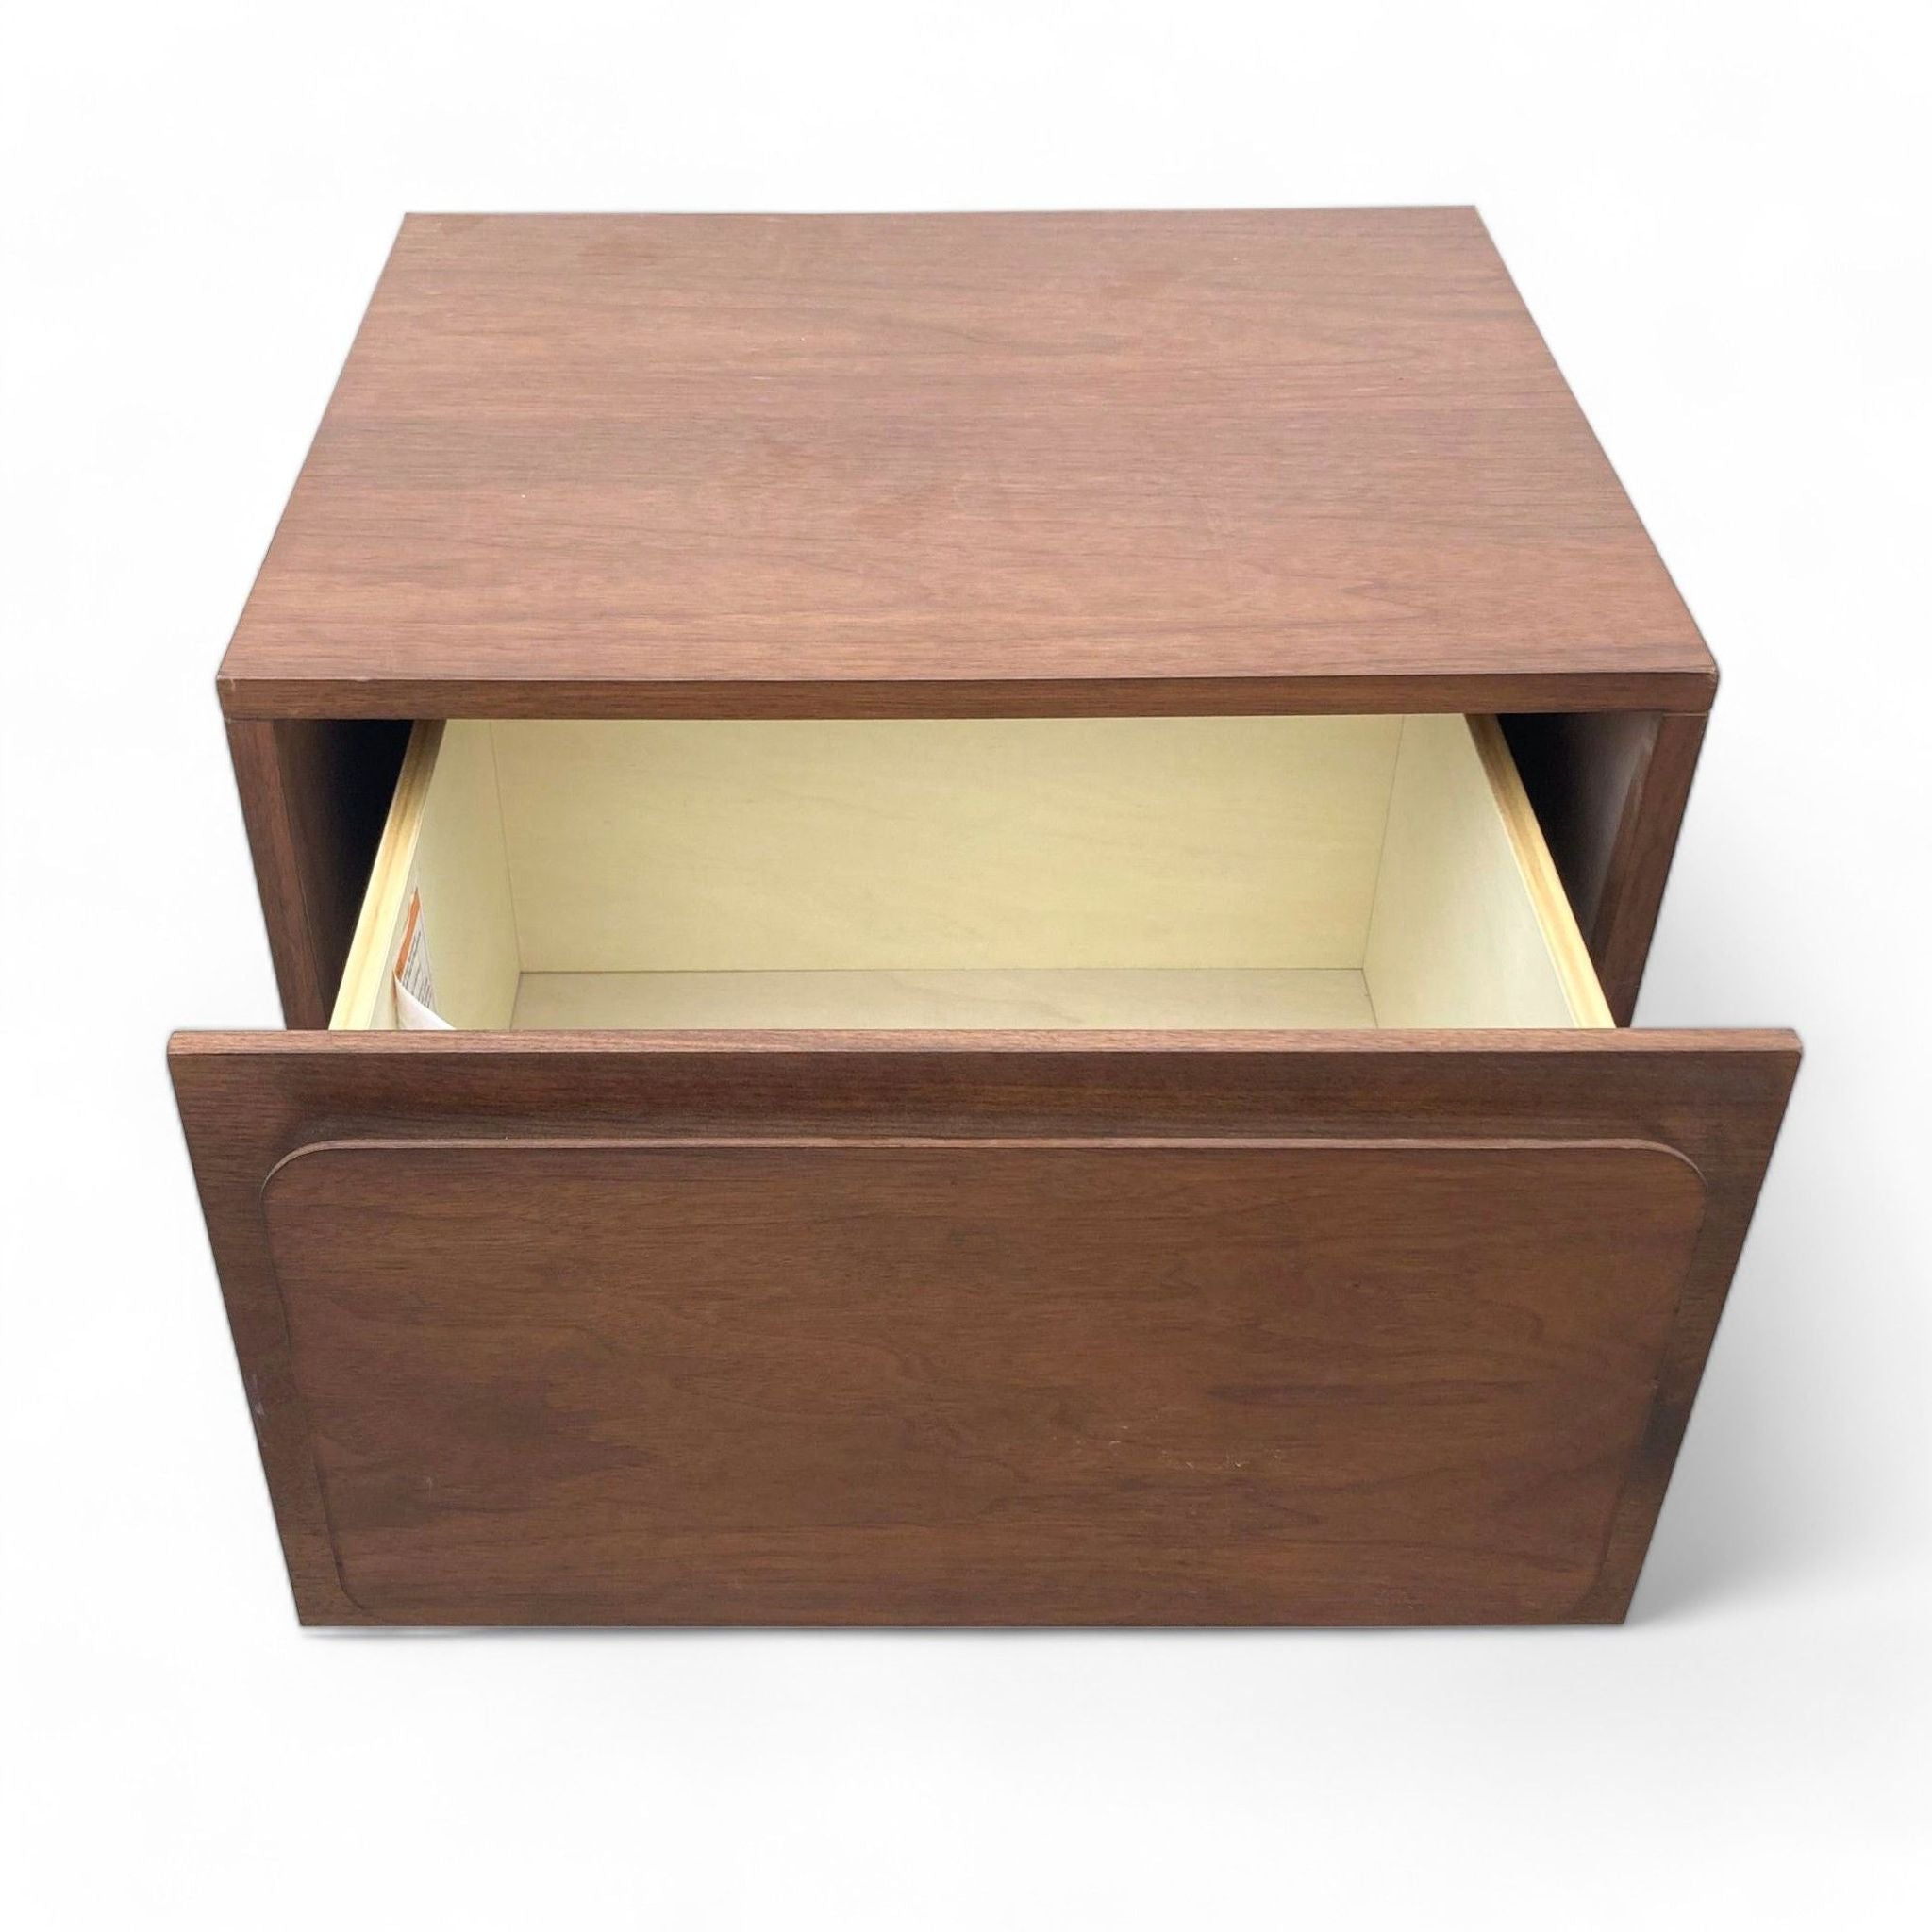 2. Open drawer of a dark walnut West Elm end table, revealing inside storage with a light interior.